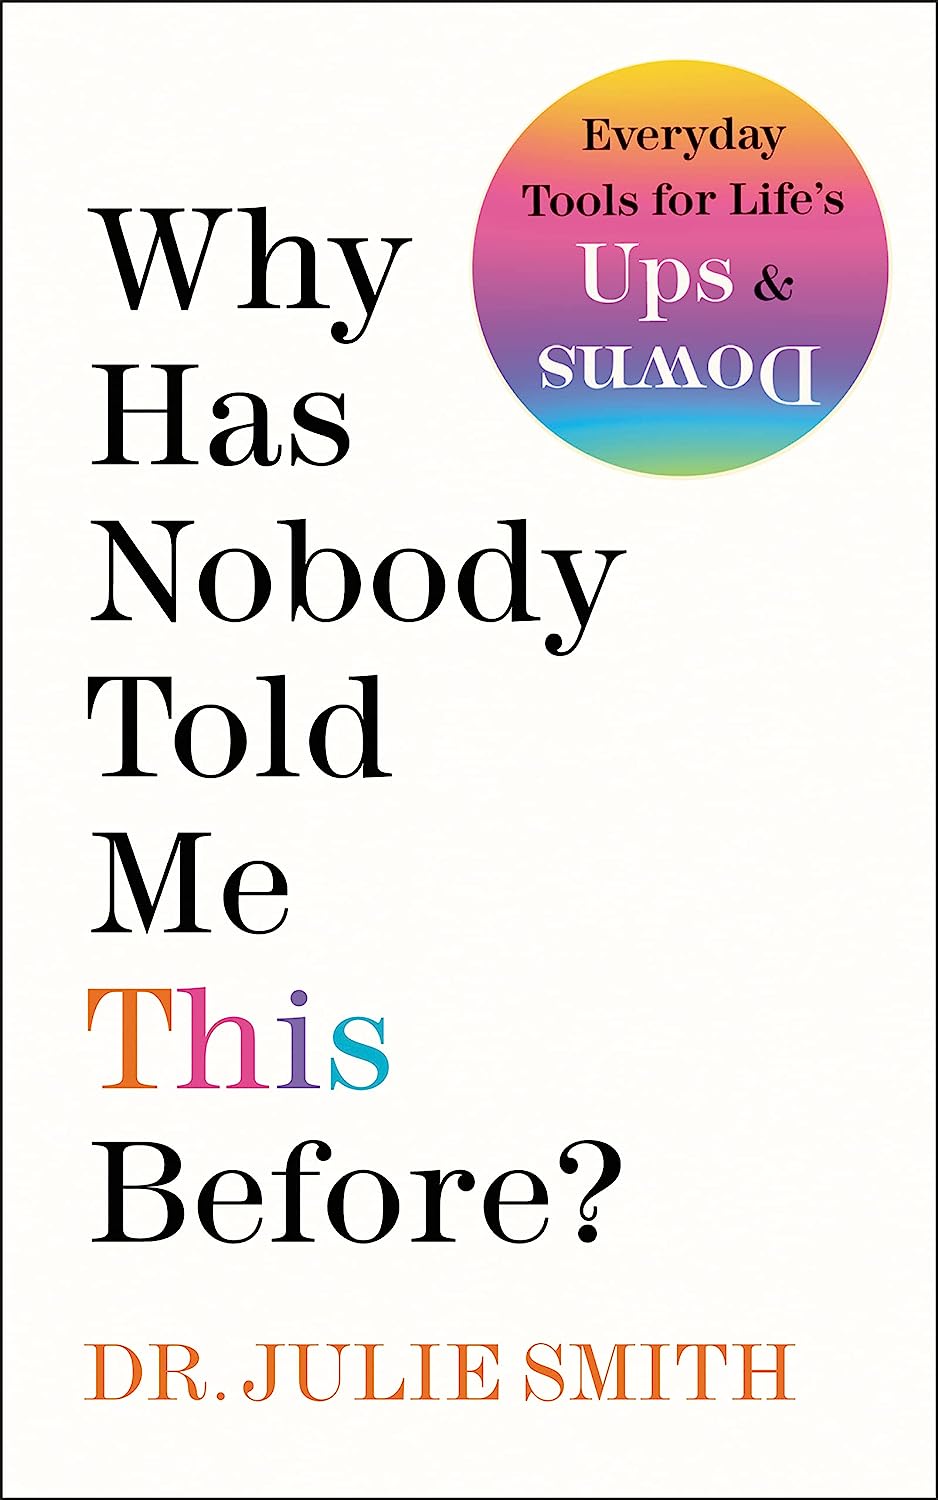 'Why Has Nobody Told Me This Before' by Dr. Julie Smith